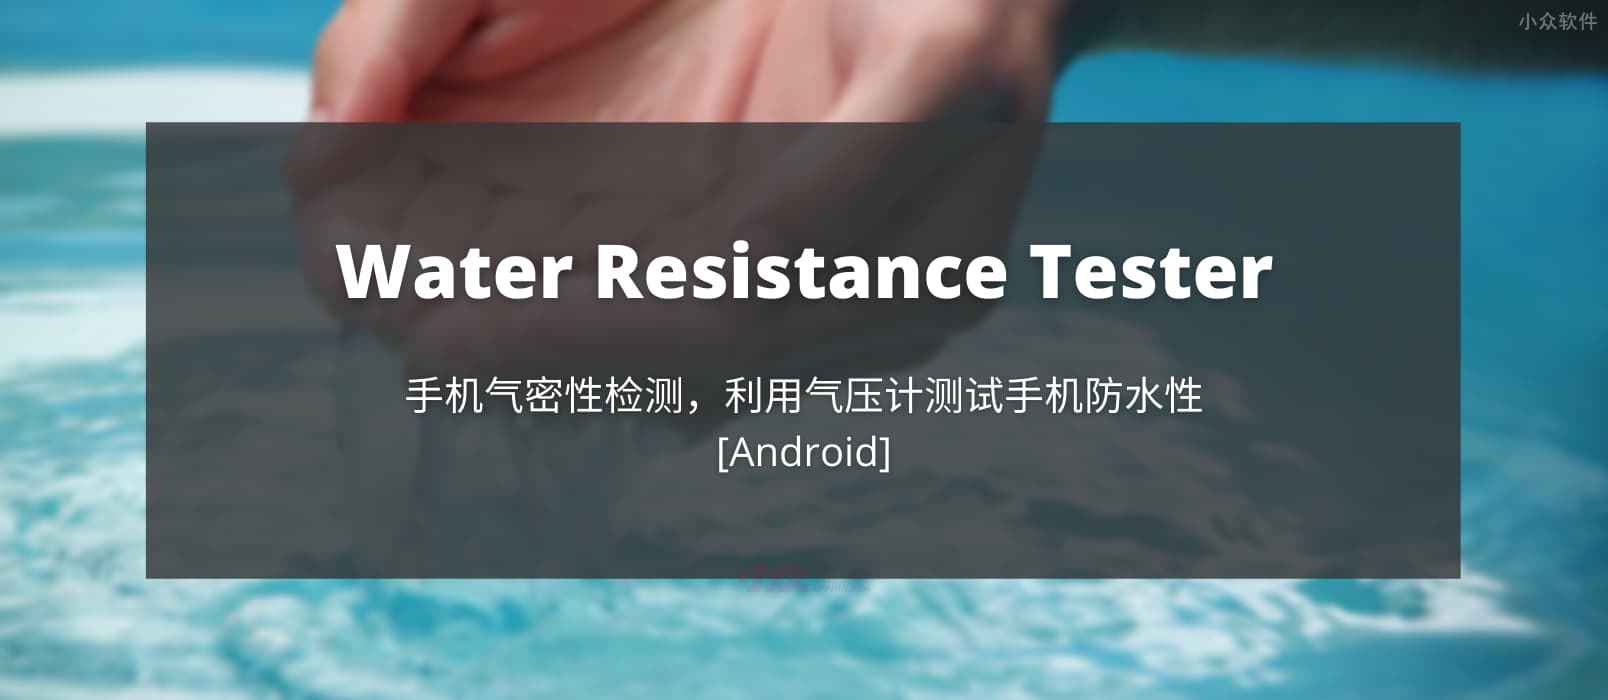 Water Resistance Tester - 手机气密性检测，根据气压计测试手机防水性[Android]